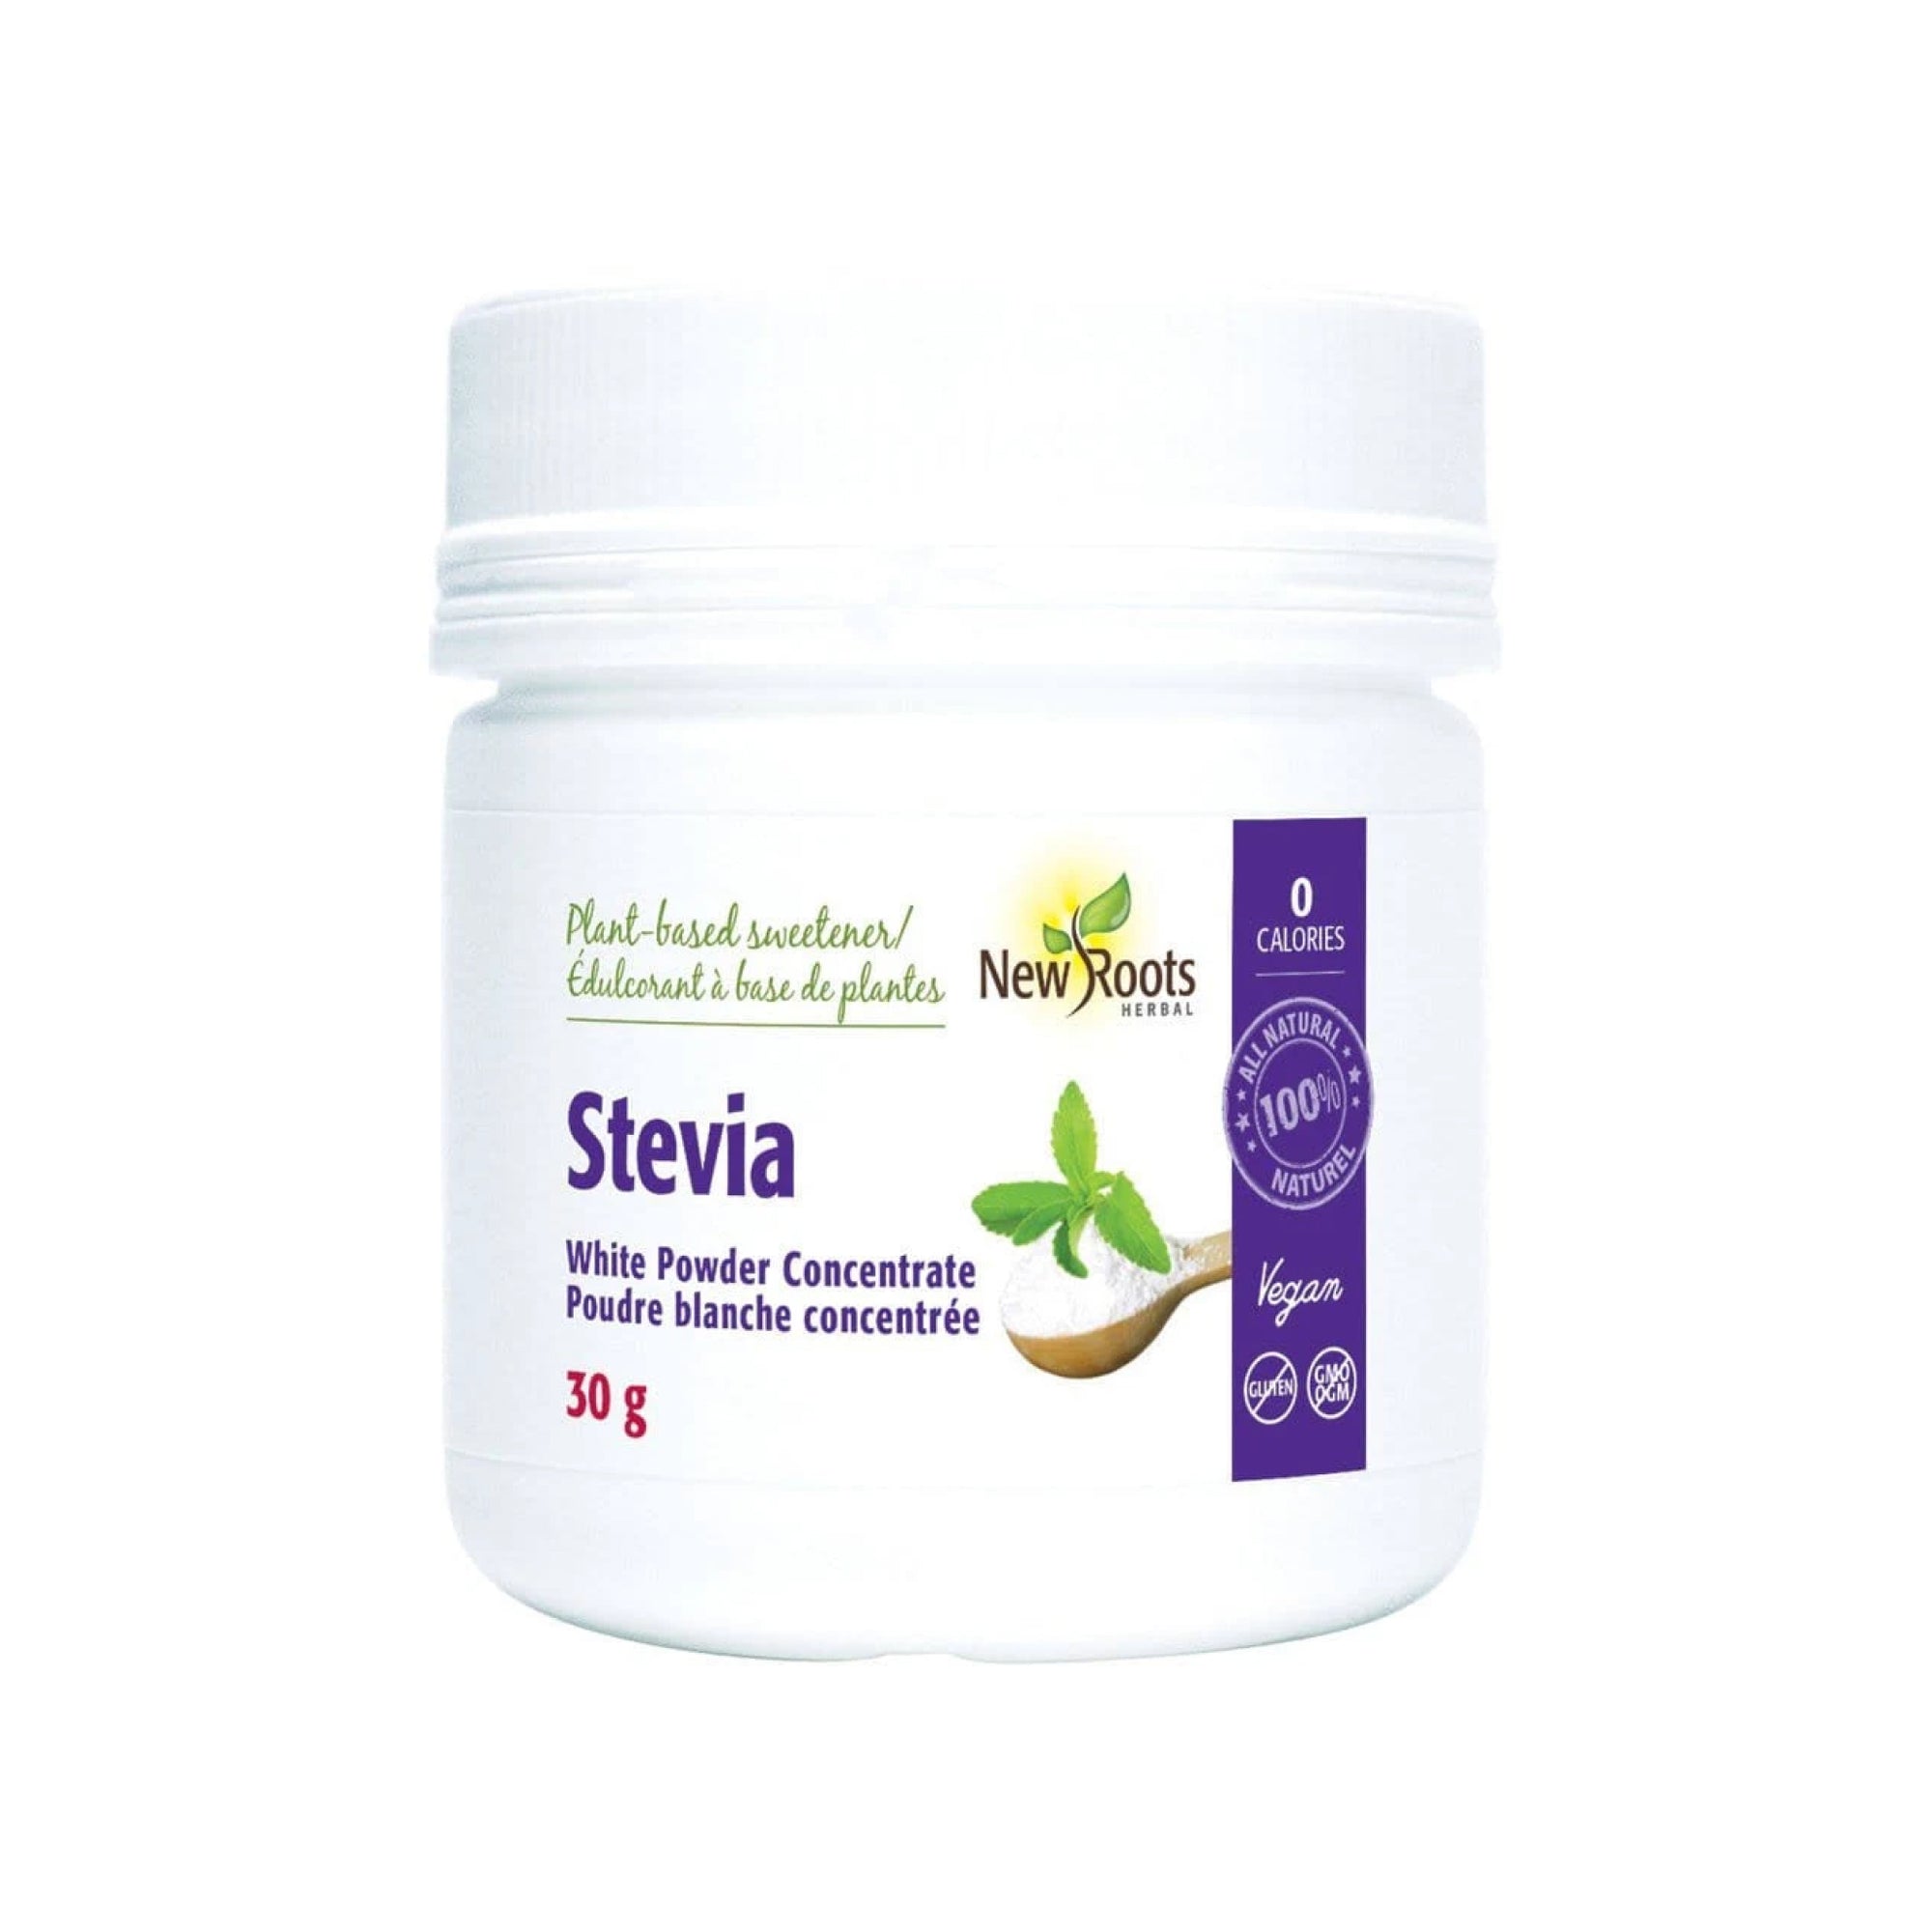 New Roots Stevia White Powder Concentrate 30g